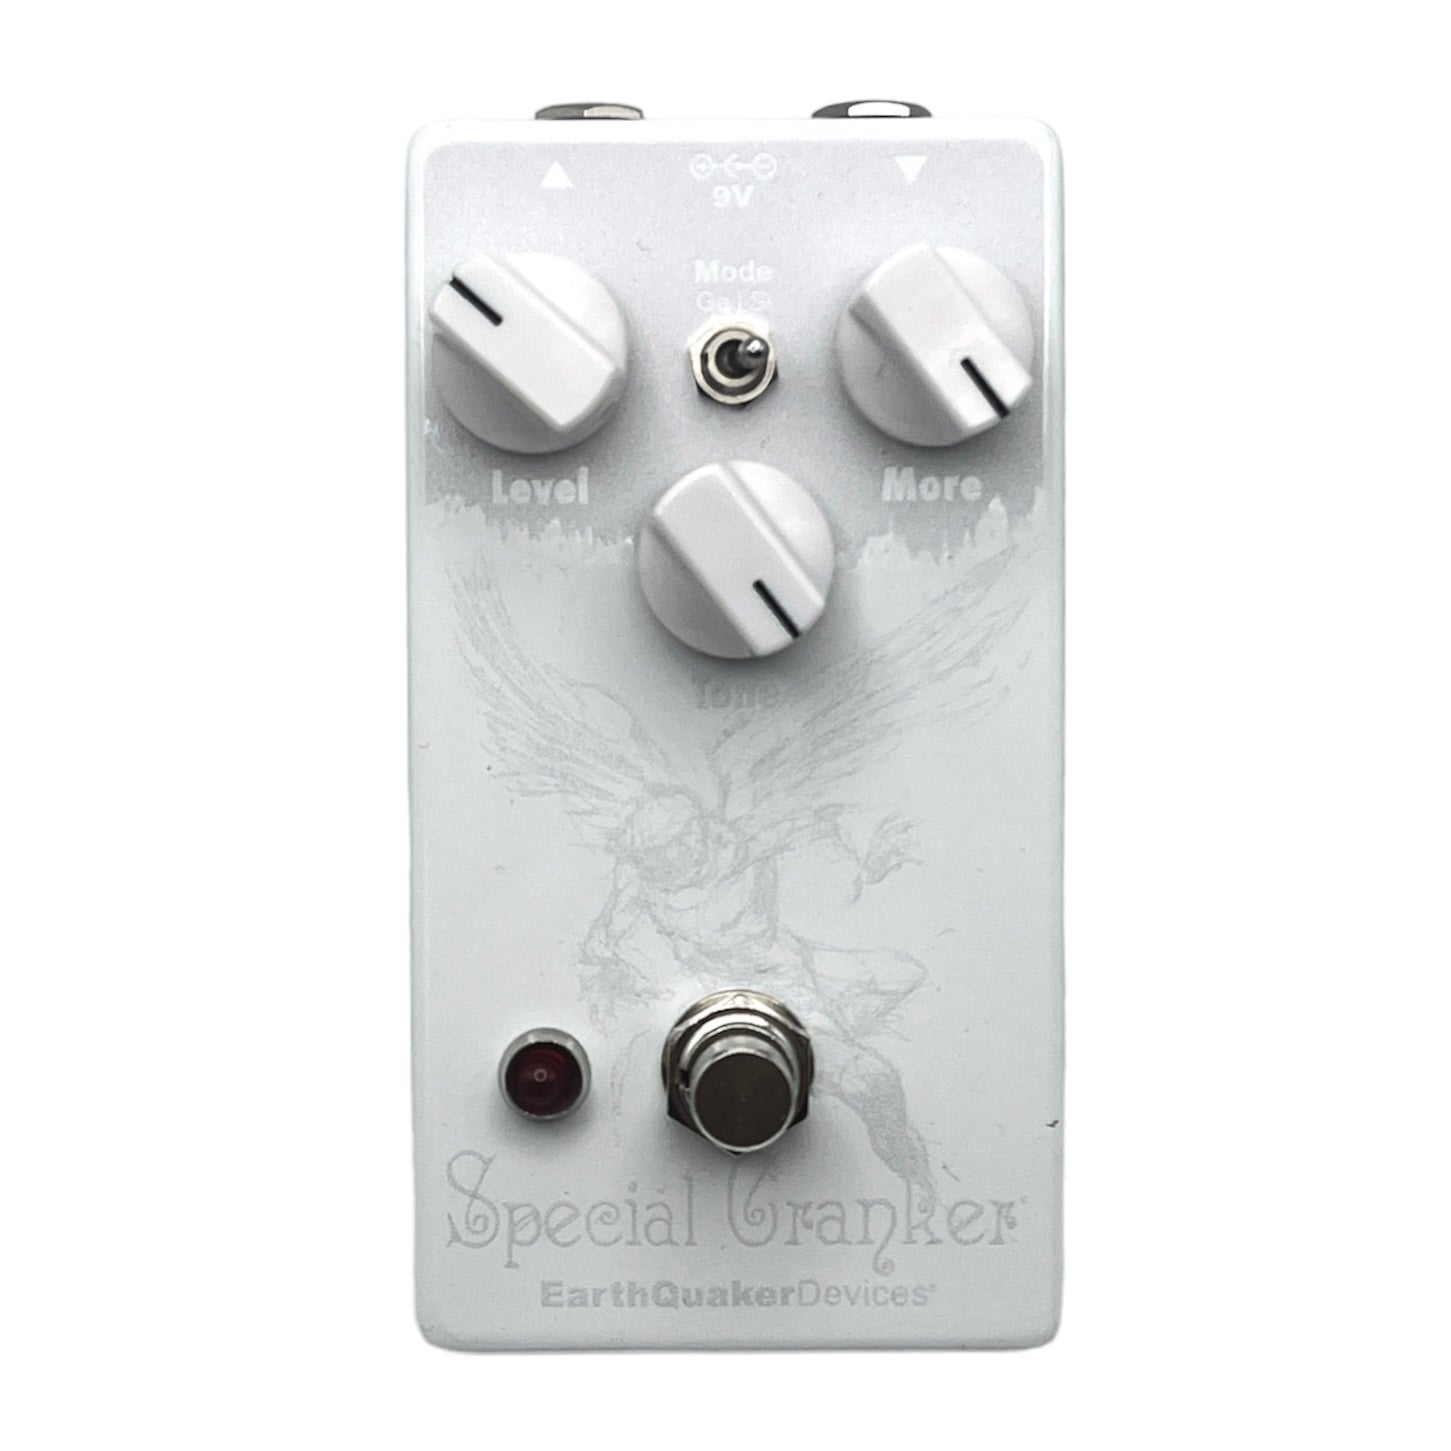 ROCK HALL X EARTHQUAKER DEVICES - LIMITED EDITION WHITE SPECIAL